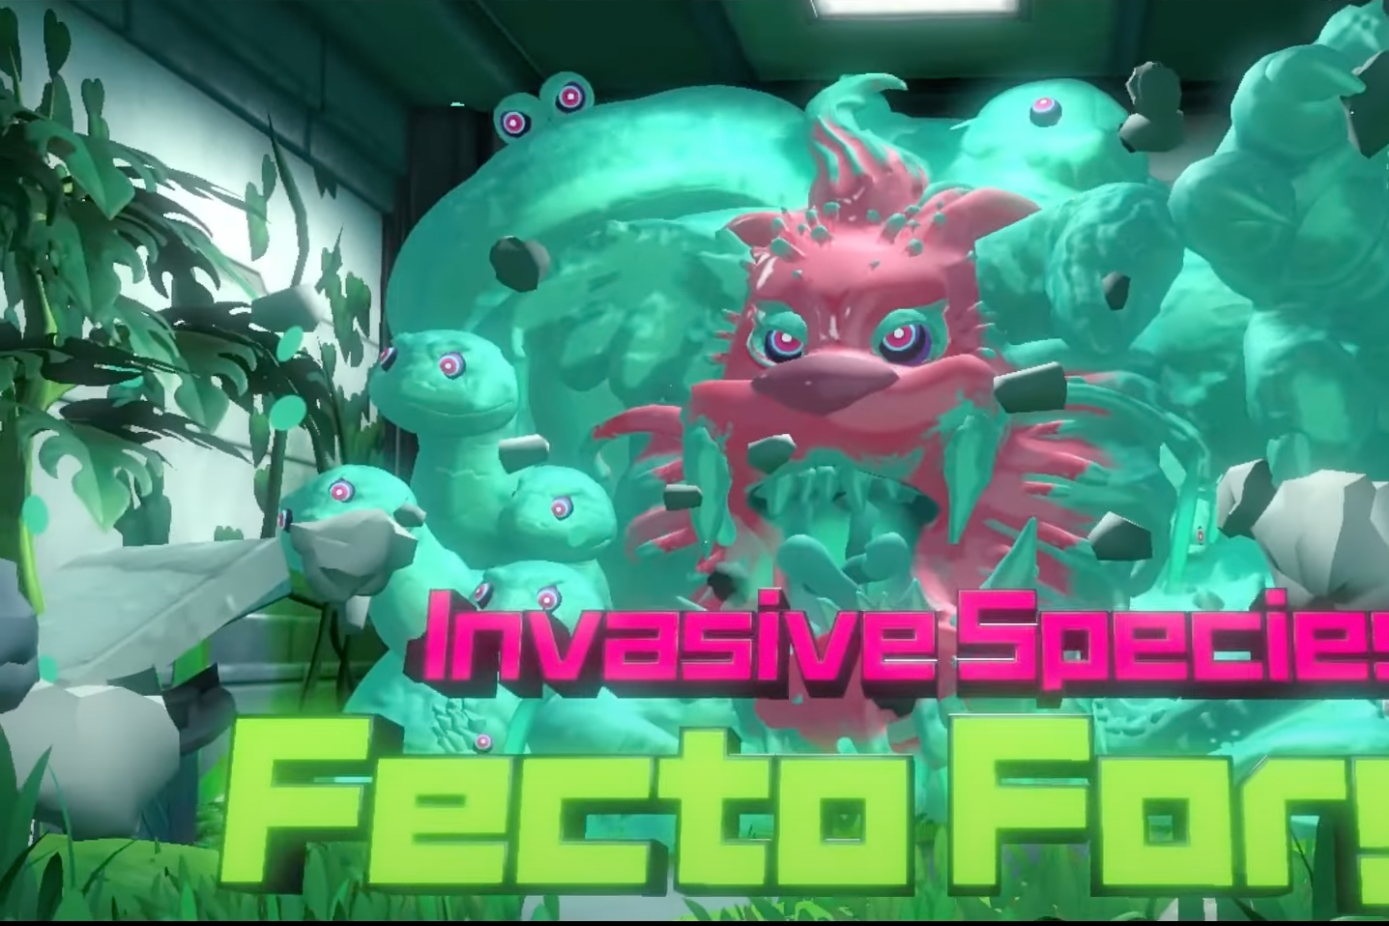 A green and pink monster bursts through a wall. Underneath is a caption reading, "INVASIVE SPECIES: FECTO FORGE."